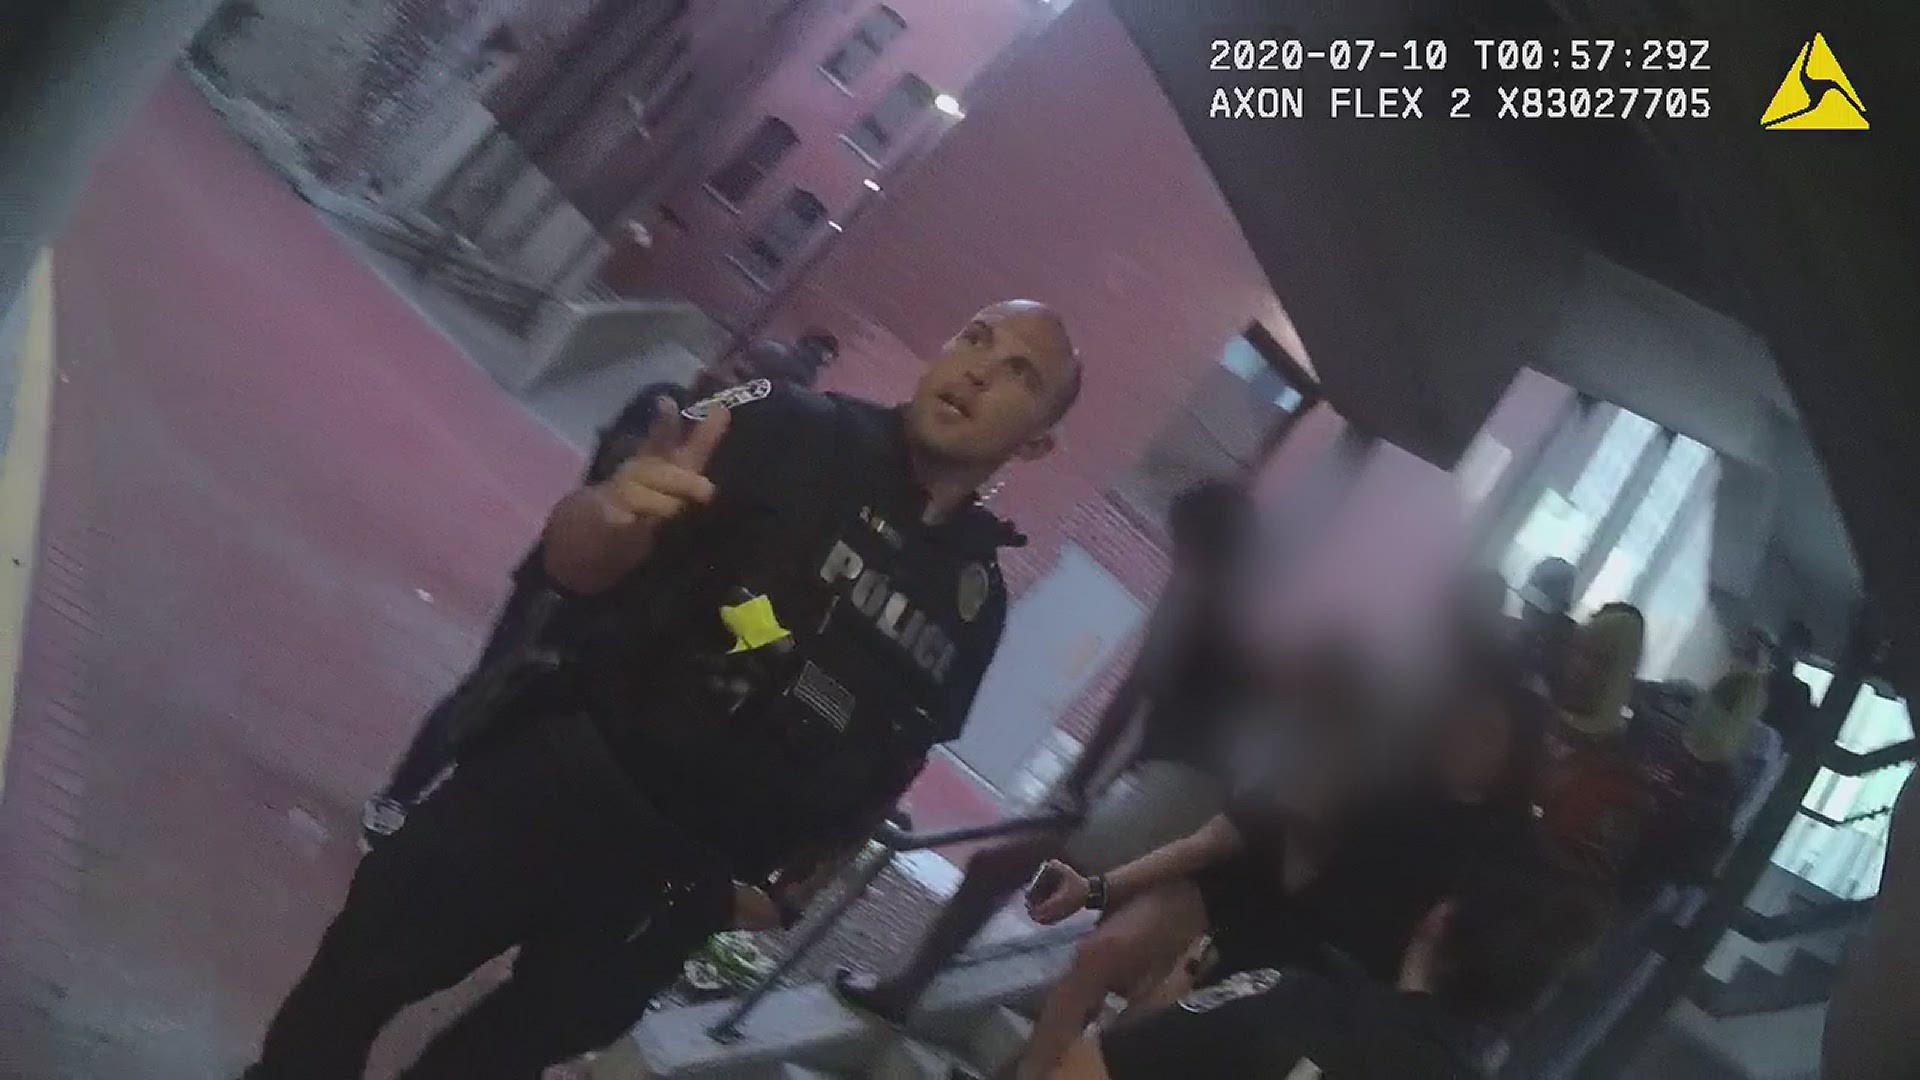 Police said the video shows the girl following when "she attempted to disobey police orders."